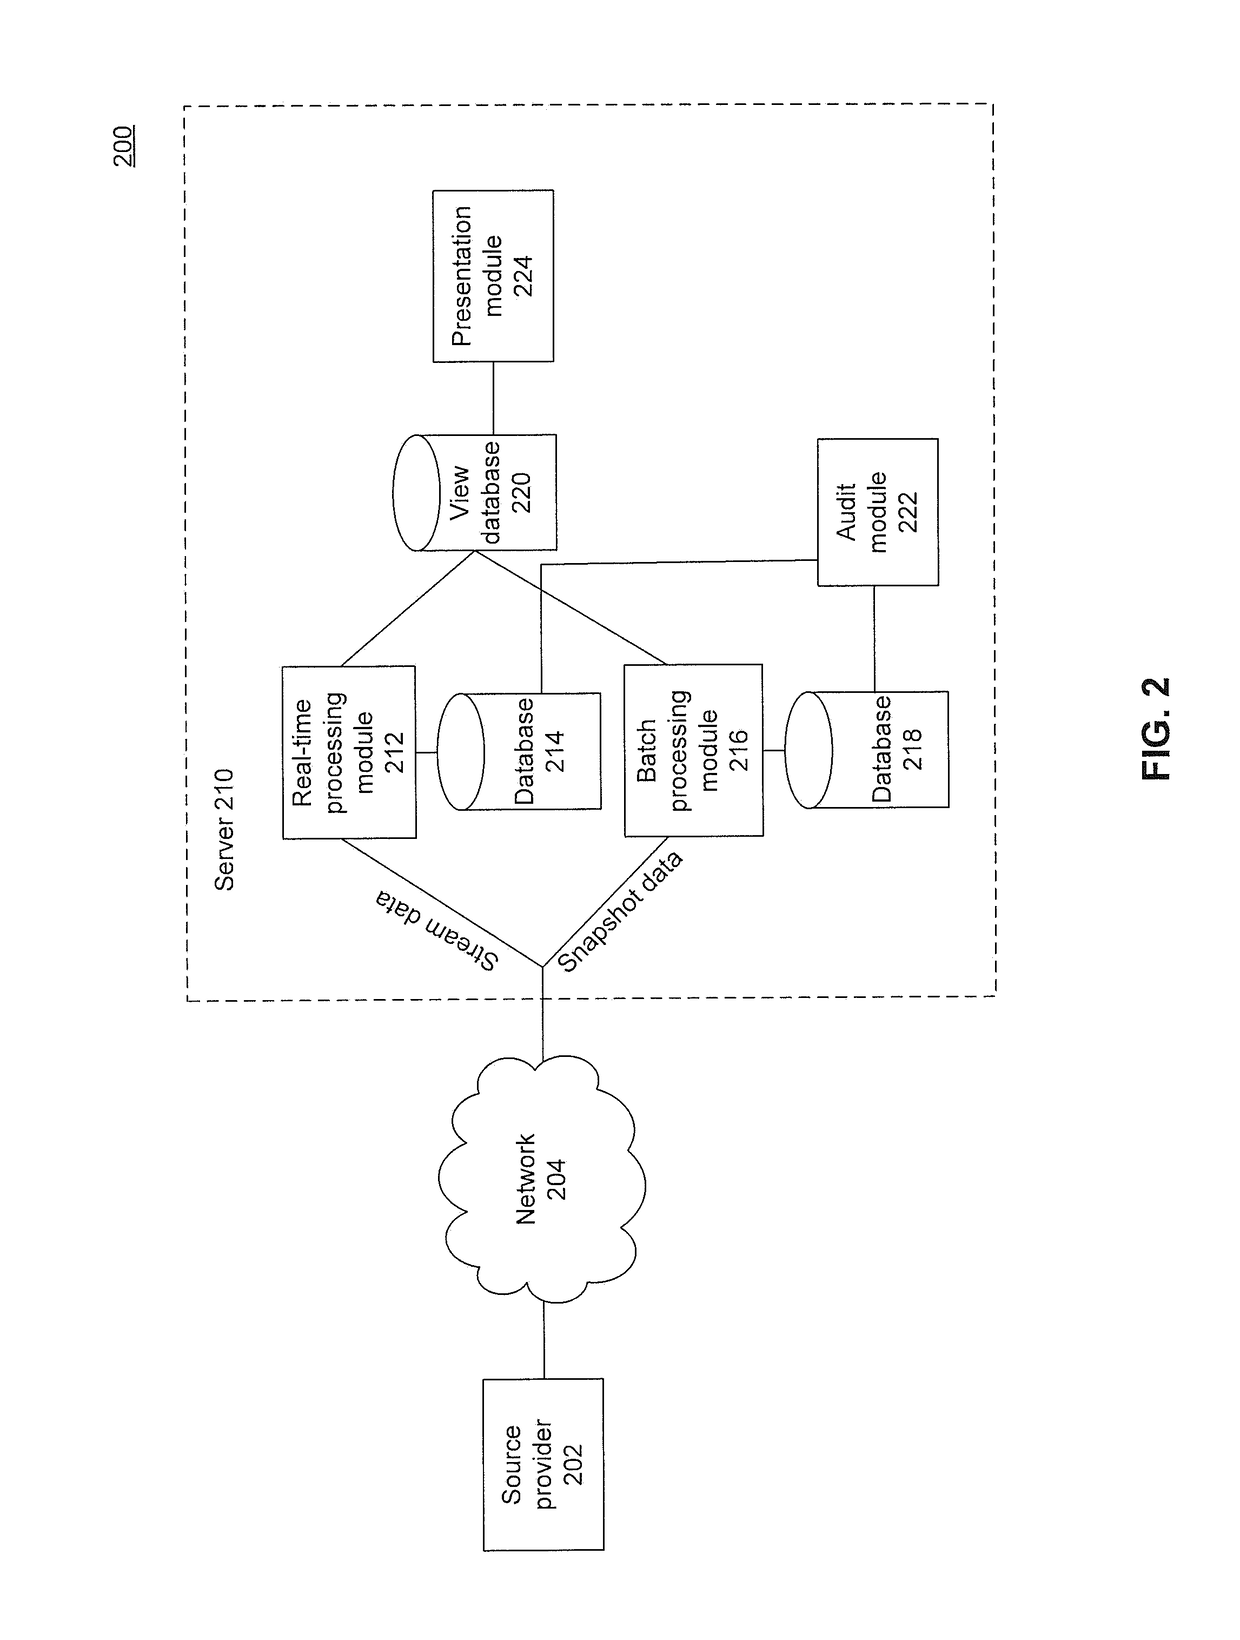 Systems and Methods for Robust, Incremental Data Ingest of Communications Networks Topology